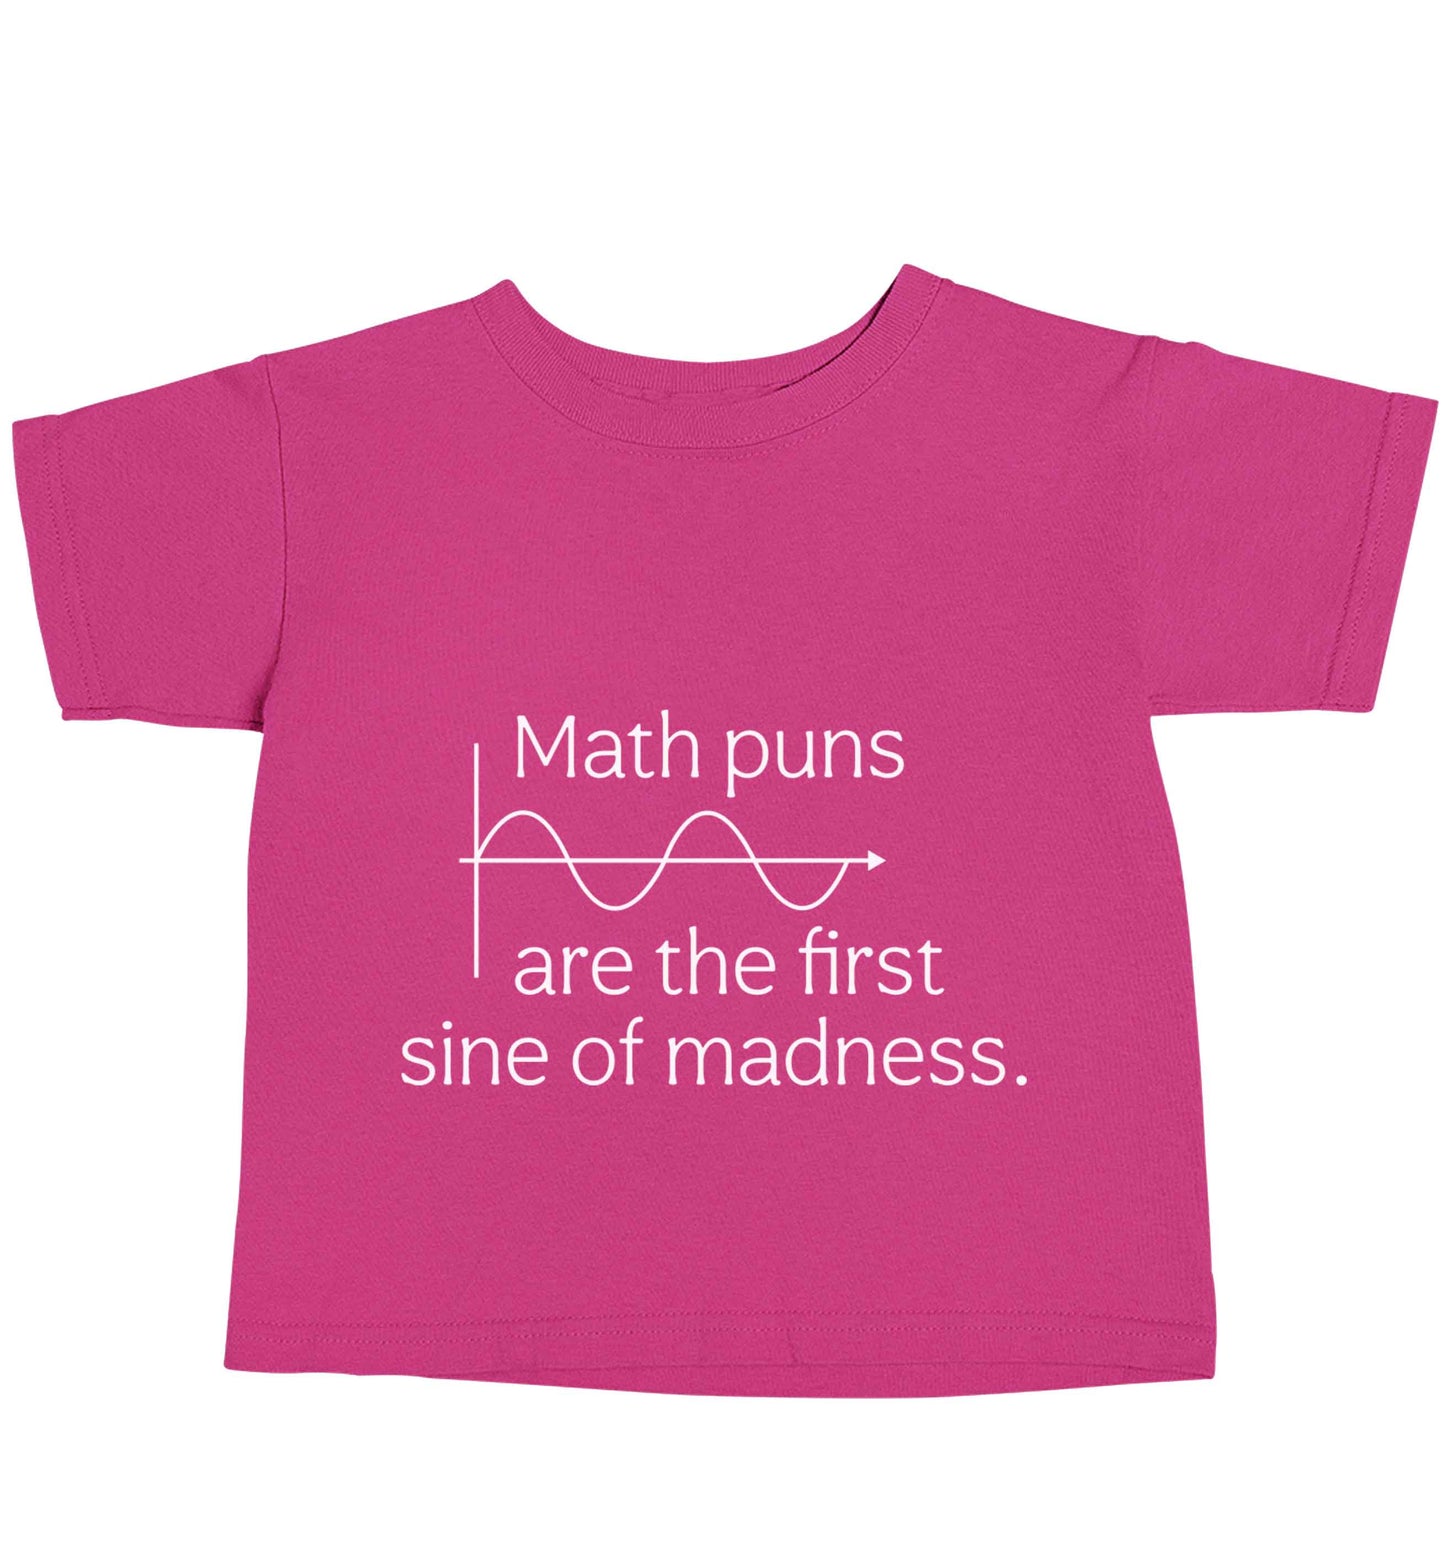 Math puns are the first sine of madness pink baby toddler Tshirt 2 Years